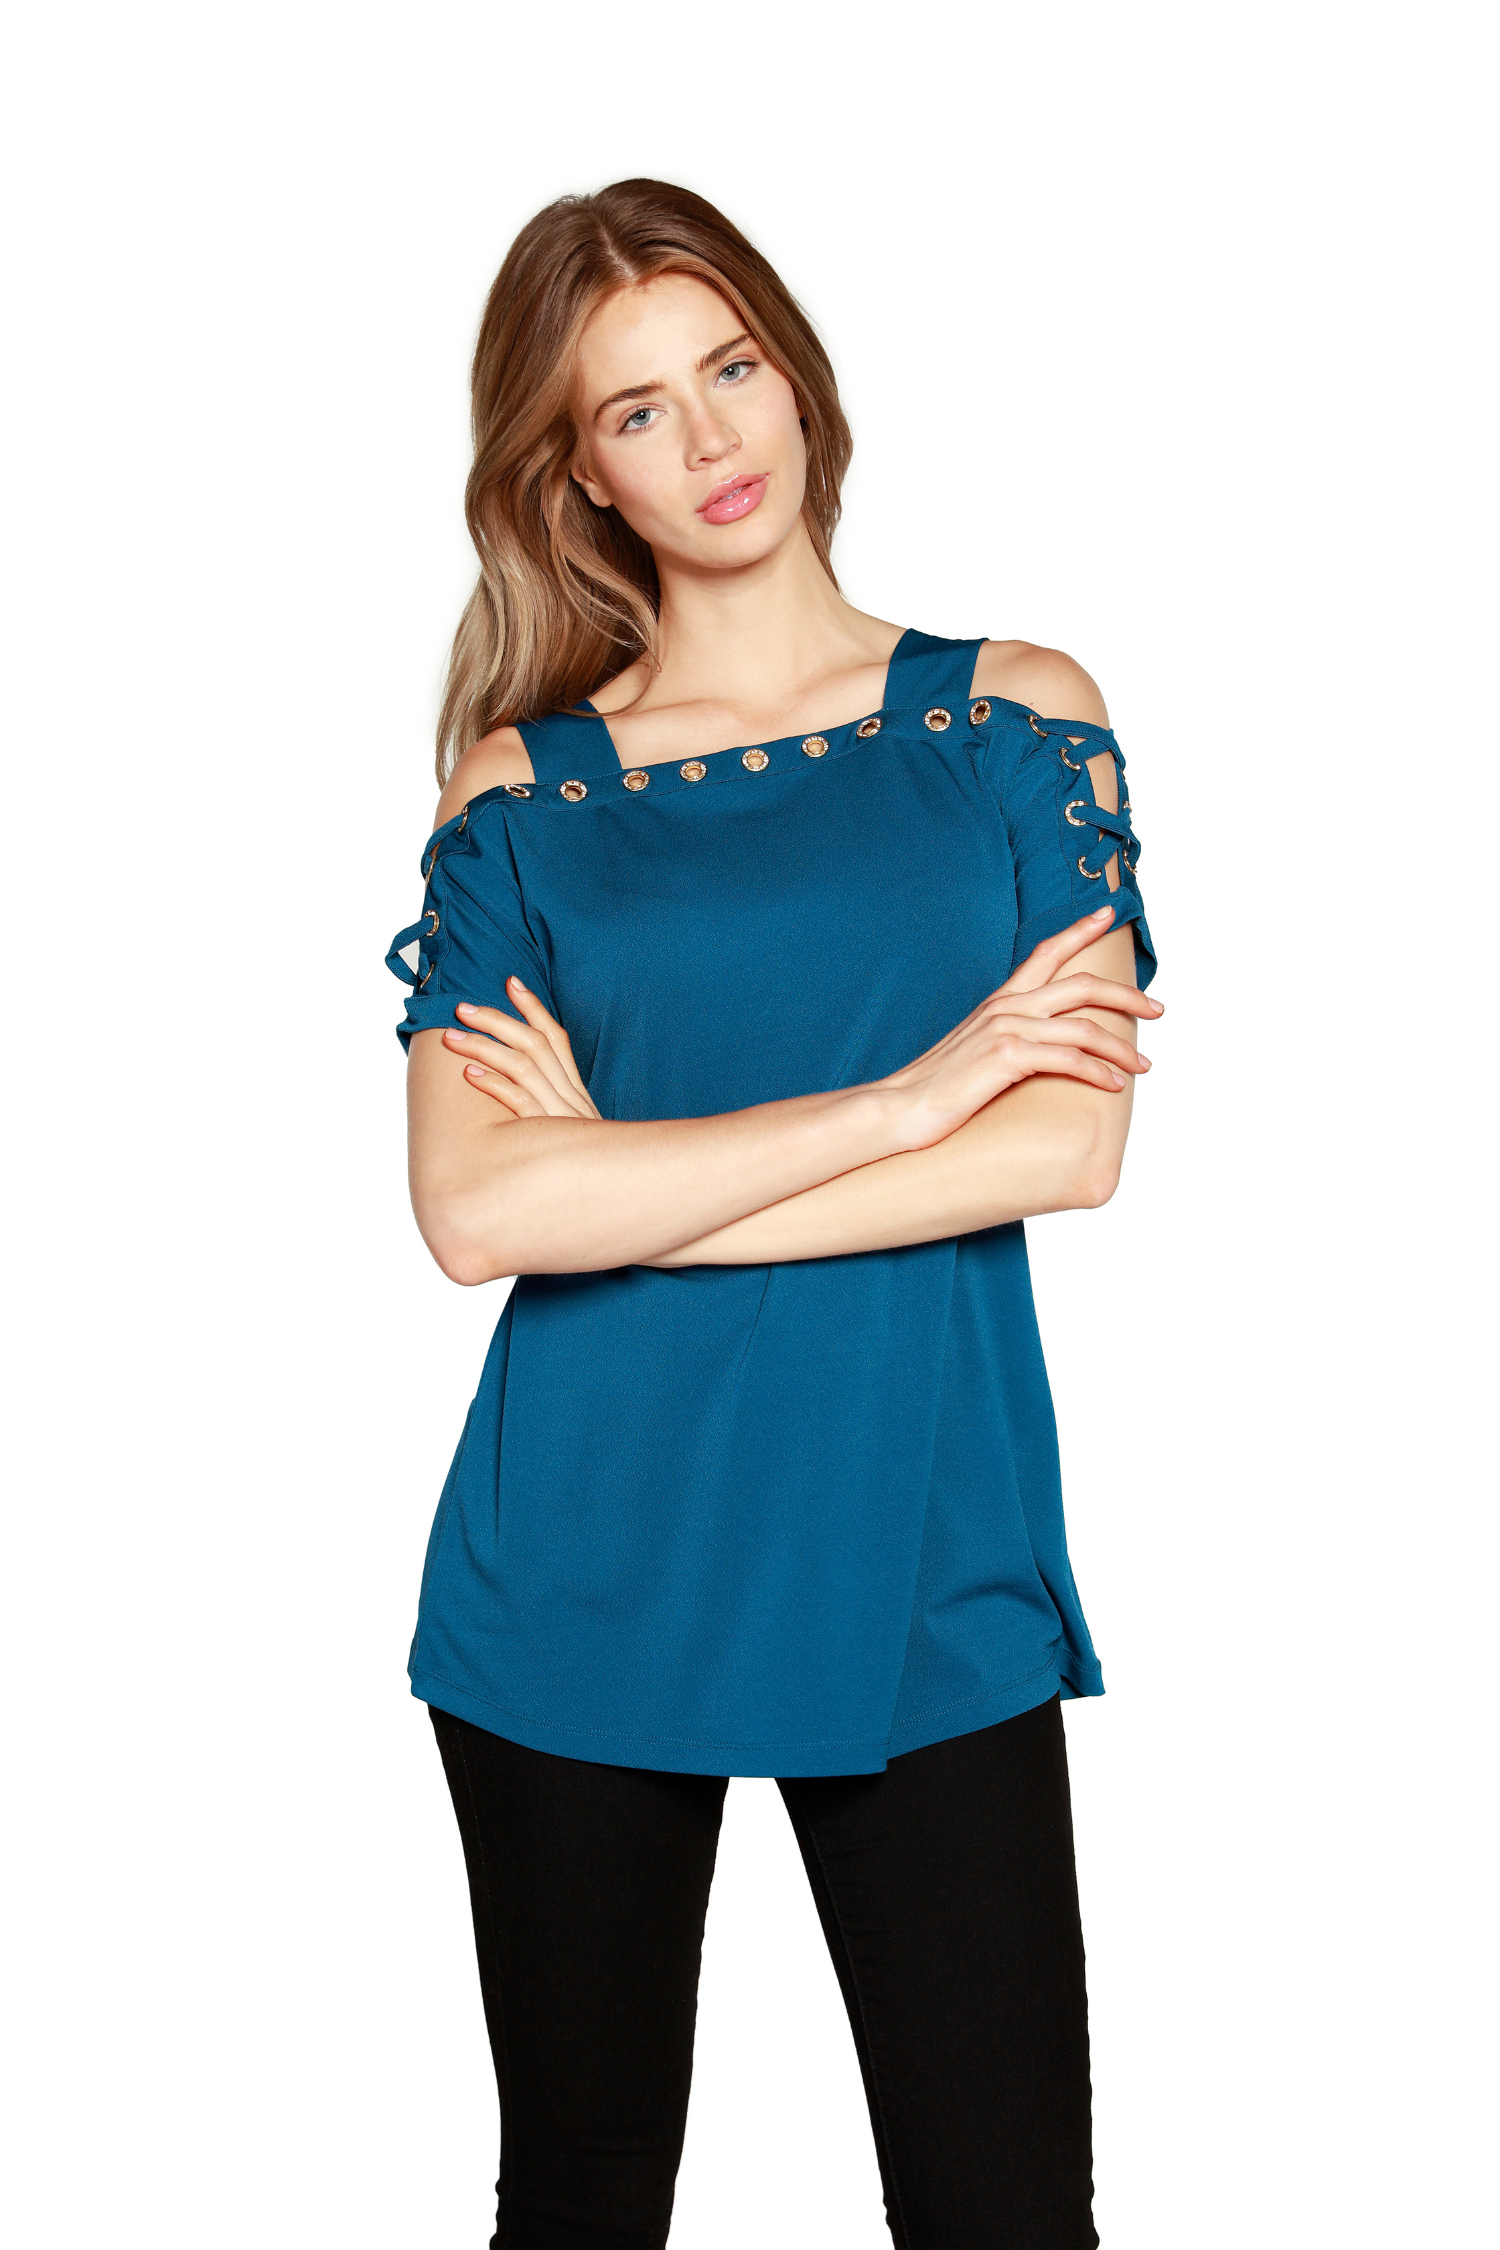 Womens Dressy Cold Shoulder Tunic Top with Laced Short Sleeves and Rhinestone Grommet Details